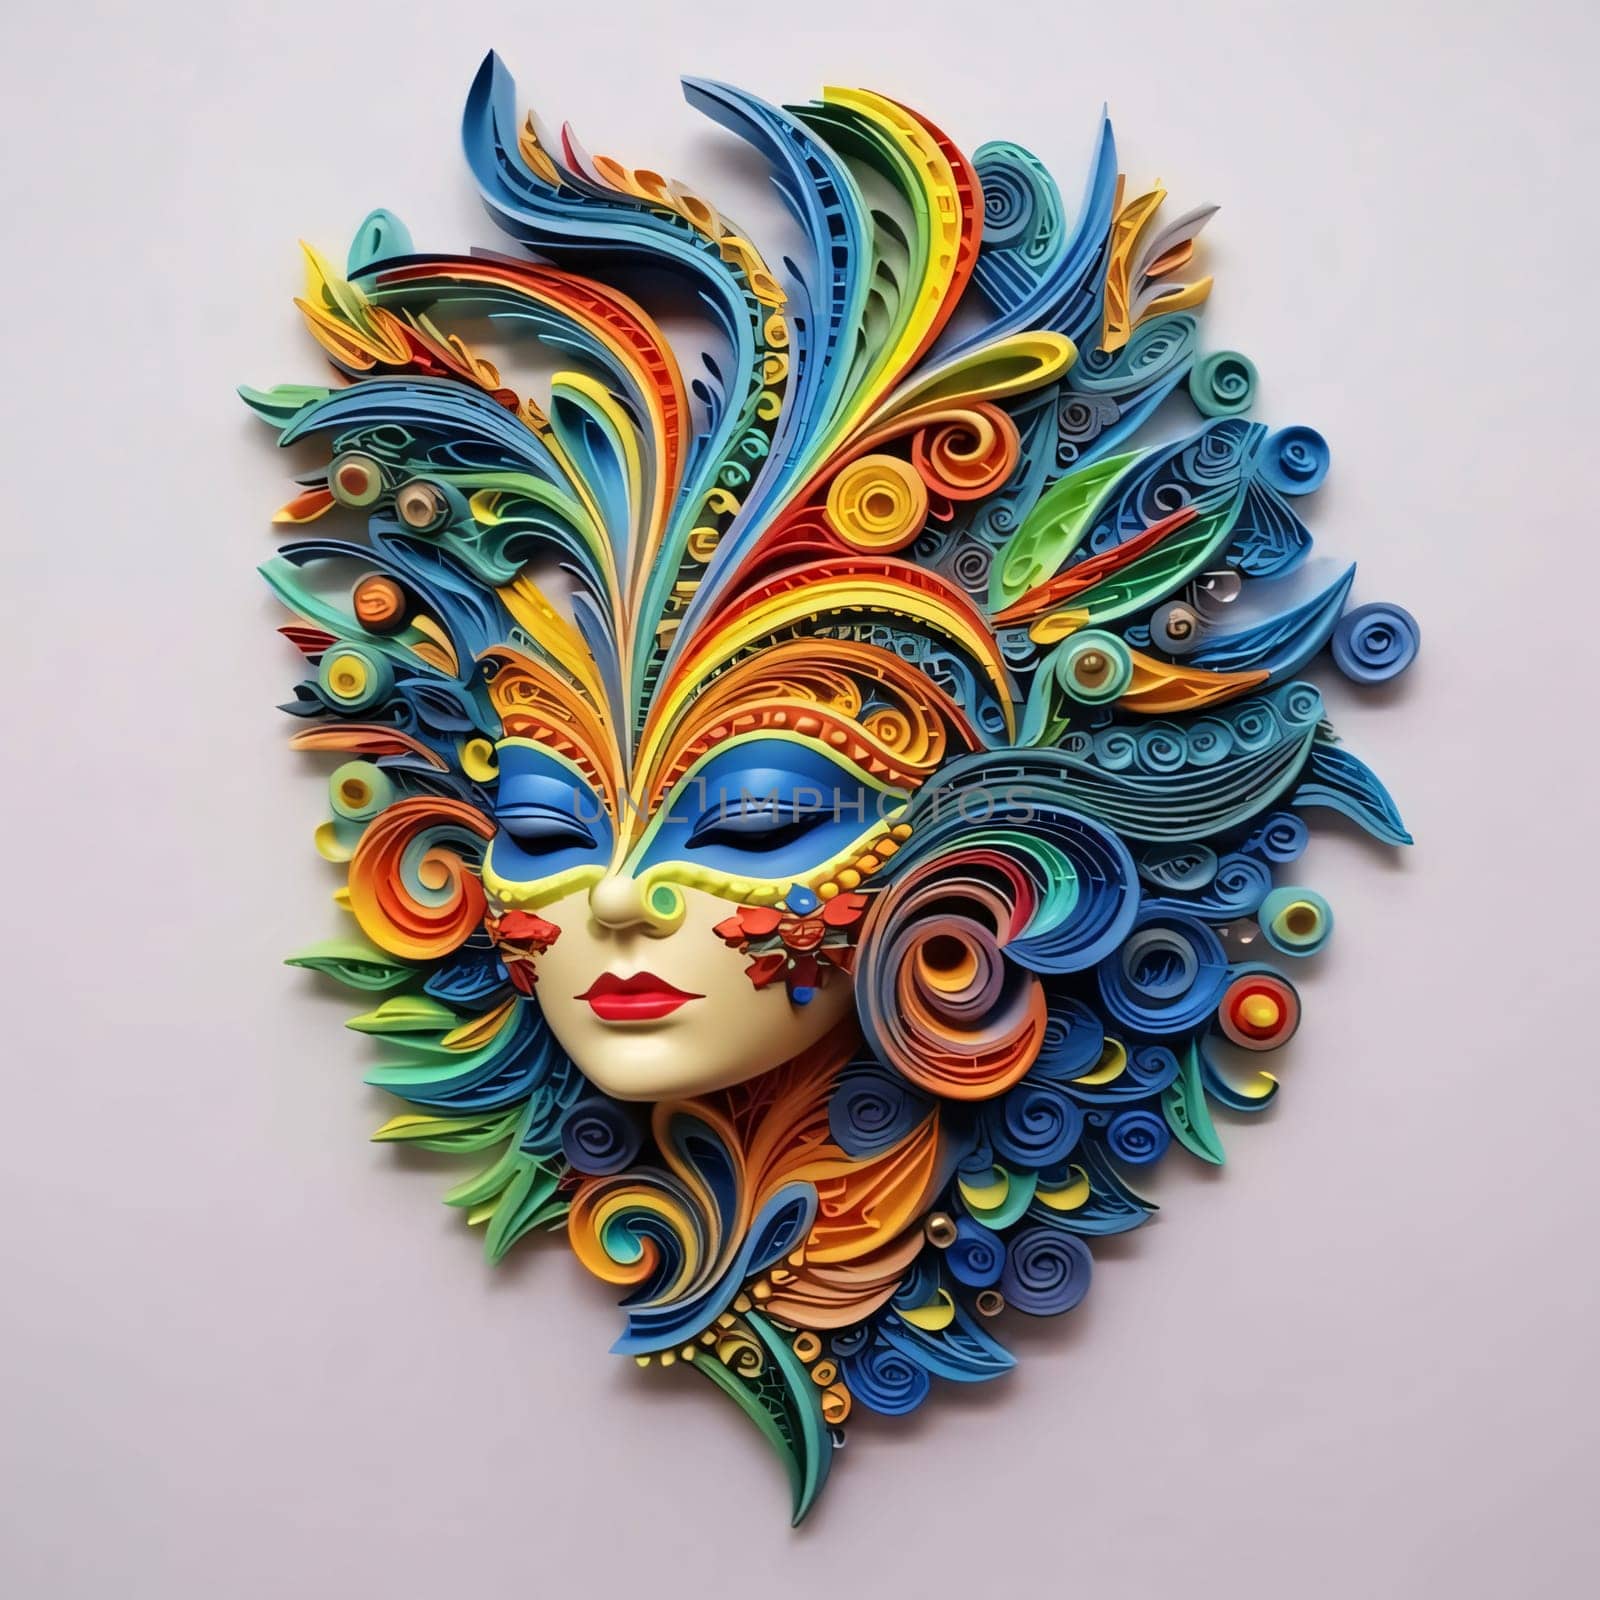 Illustration of colorful rainbow mask with rich swirls, decorations. Carnival outfits, masks and decorations. by ThemesS